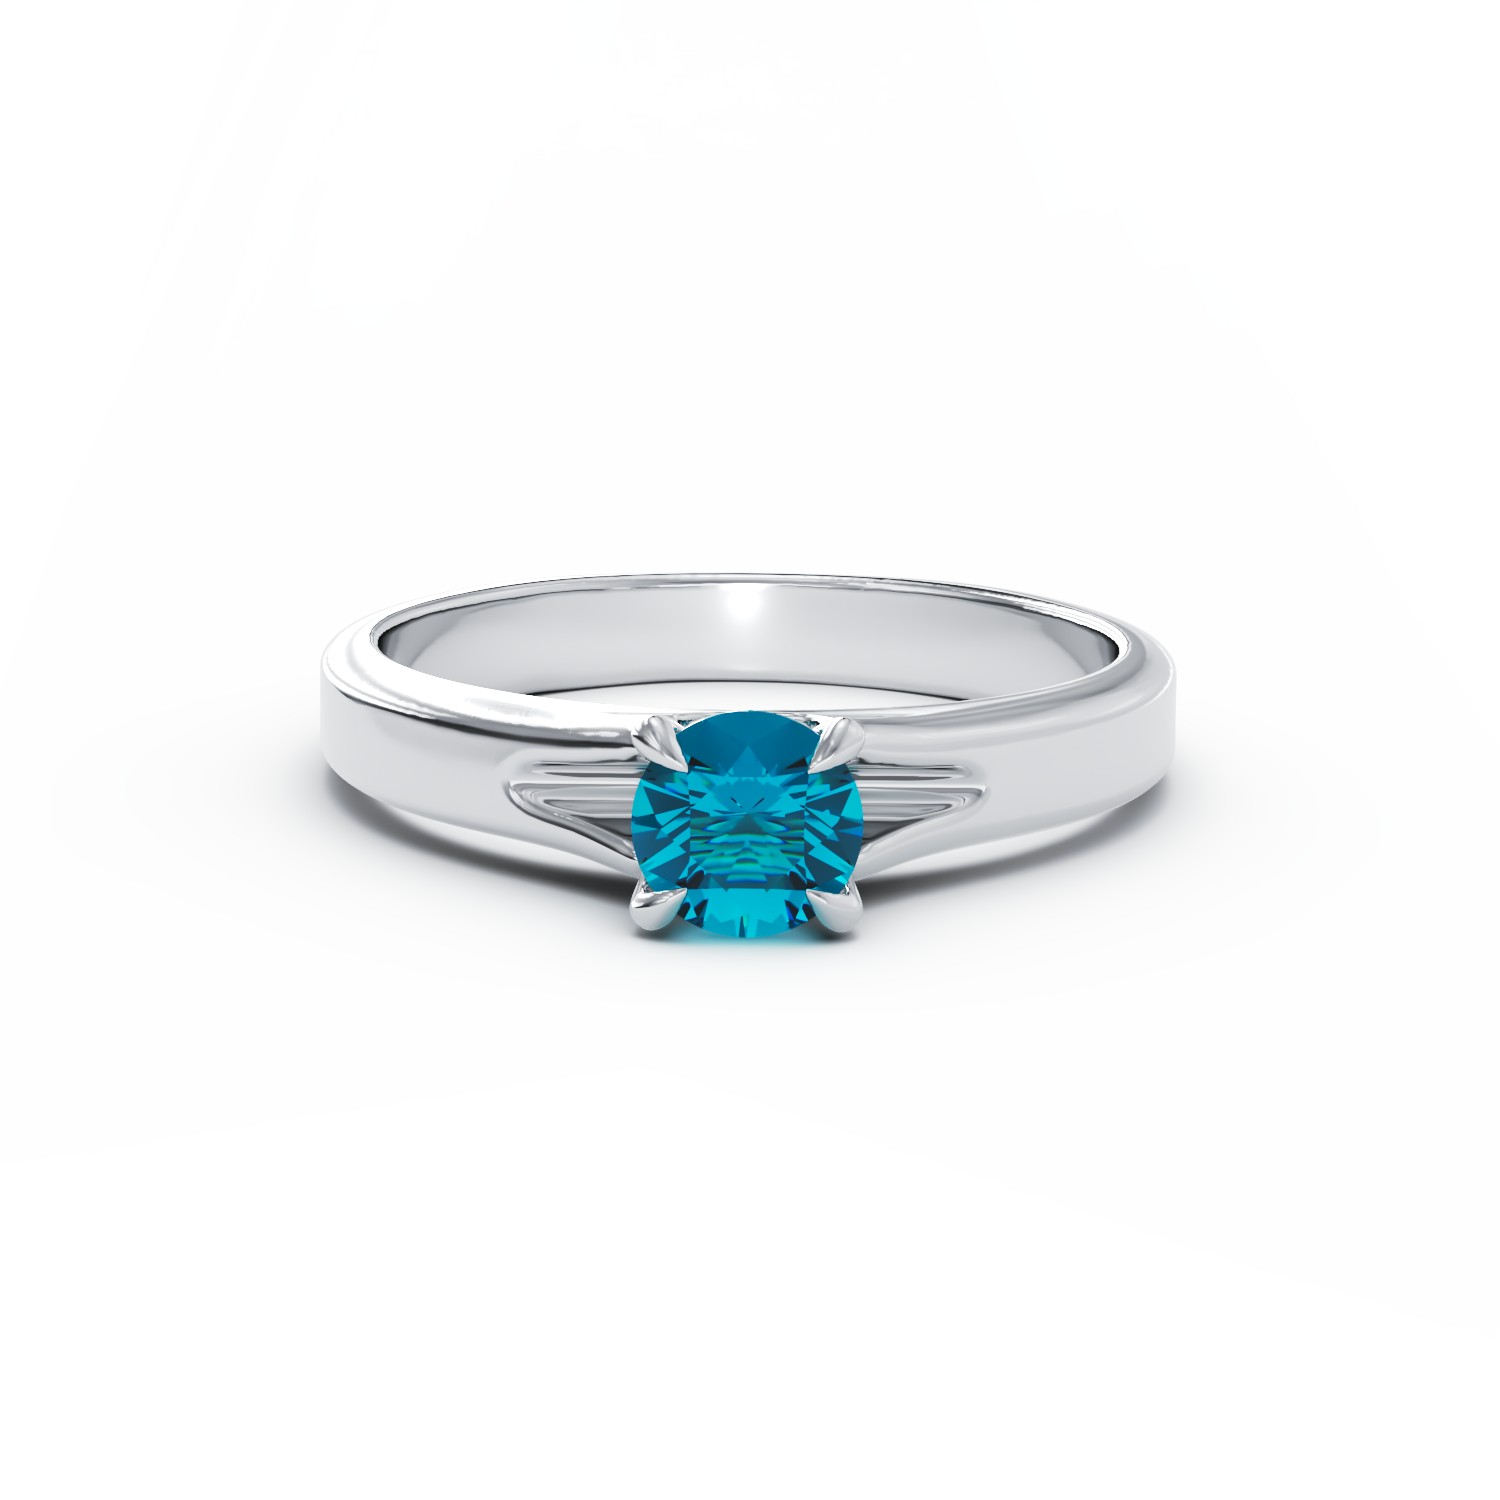 18K white gold engagement ring with a 0.33ct blue solitaire diamond